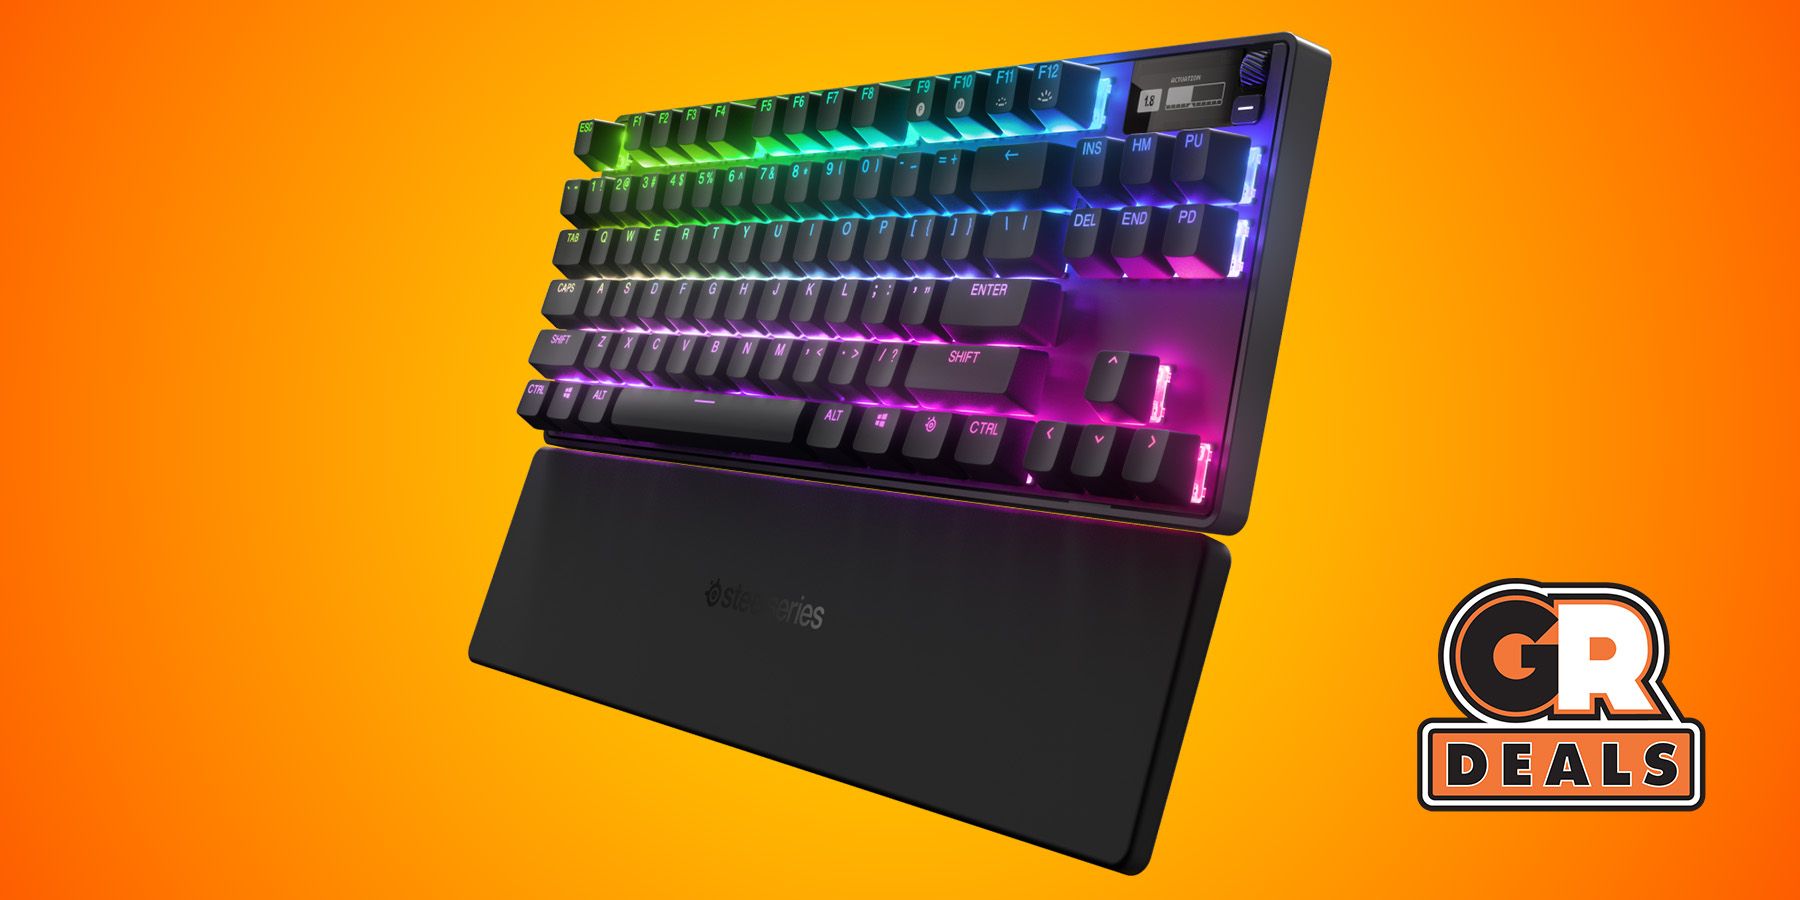 Save $50 on a New SteelSeries Apex Pro TKL Wireless Gaming Keyboard